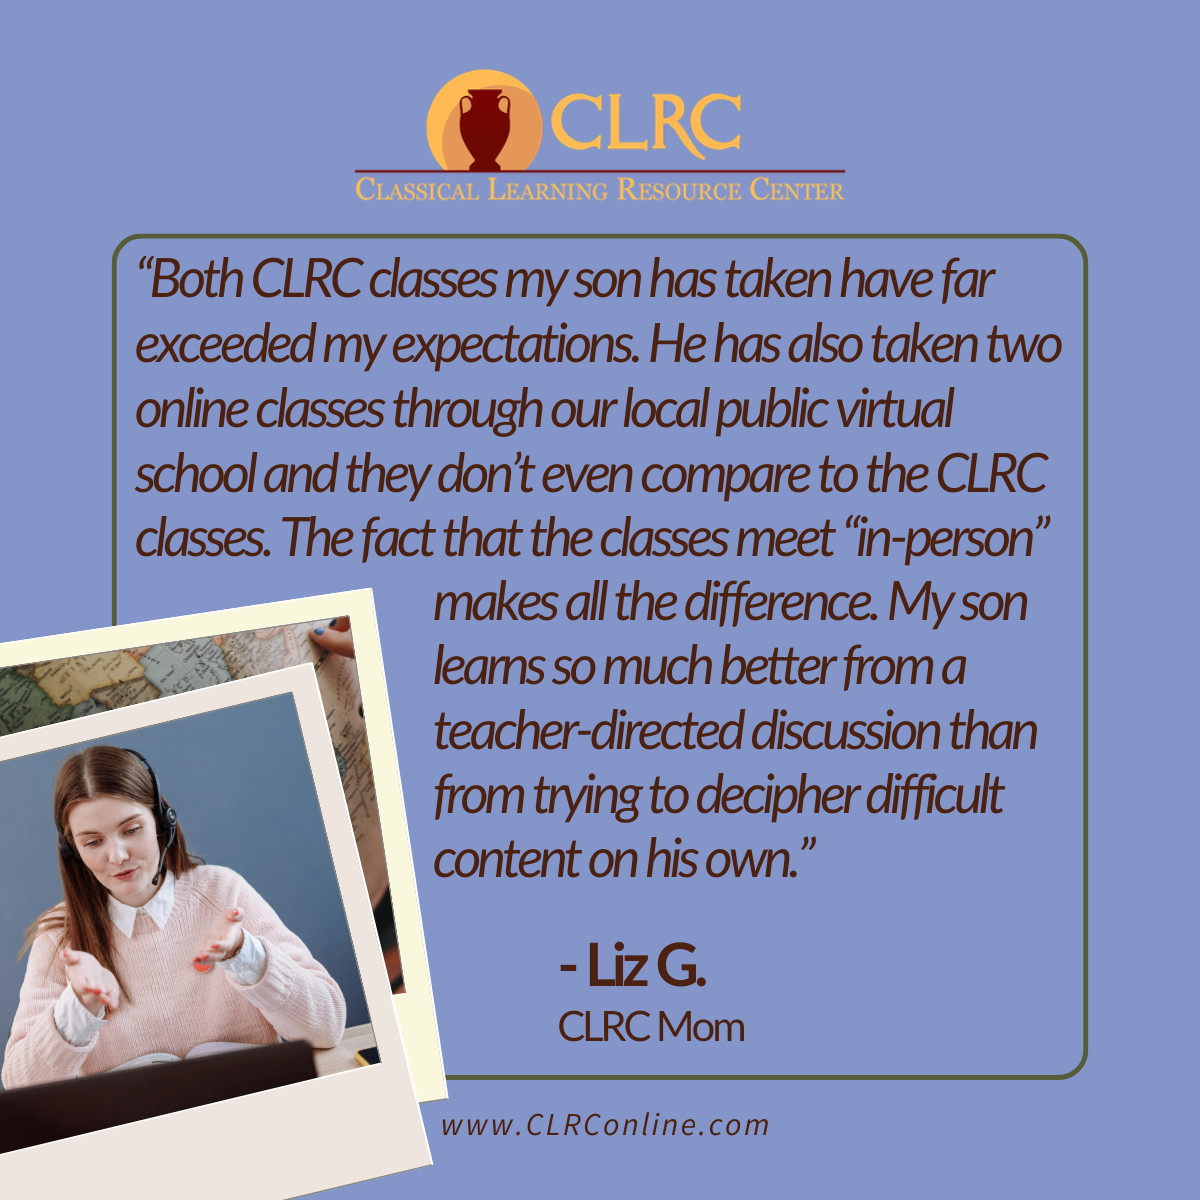 “Both CLRC classes my son has taken have far exceeded my expectations. He has also taken two online classes through our local public virtual school and they don’t even compare to the CLRC classes.”

–Liz G., Florida

#onlineclasses #interactiveonlineclasses